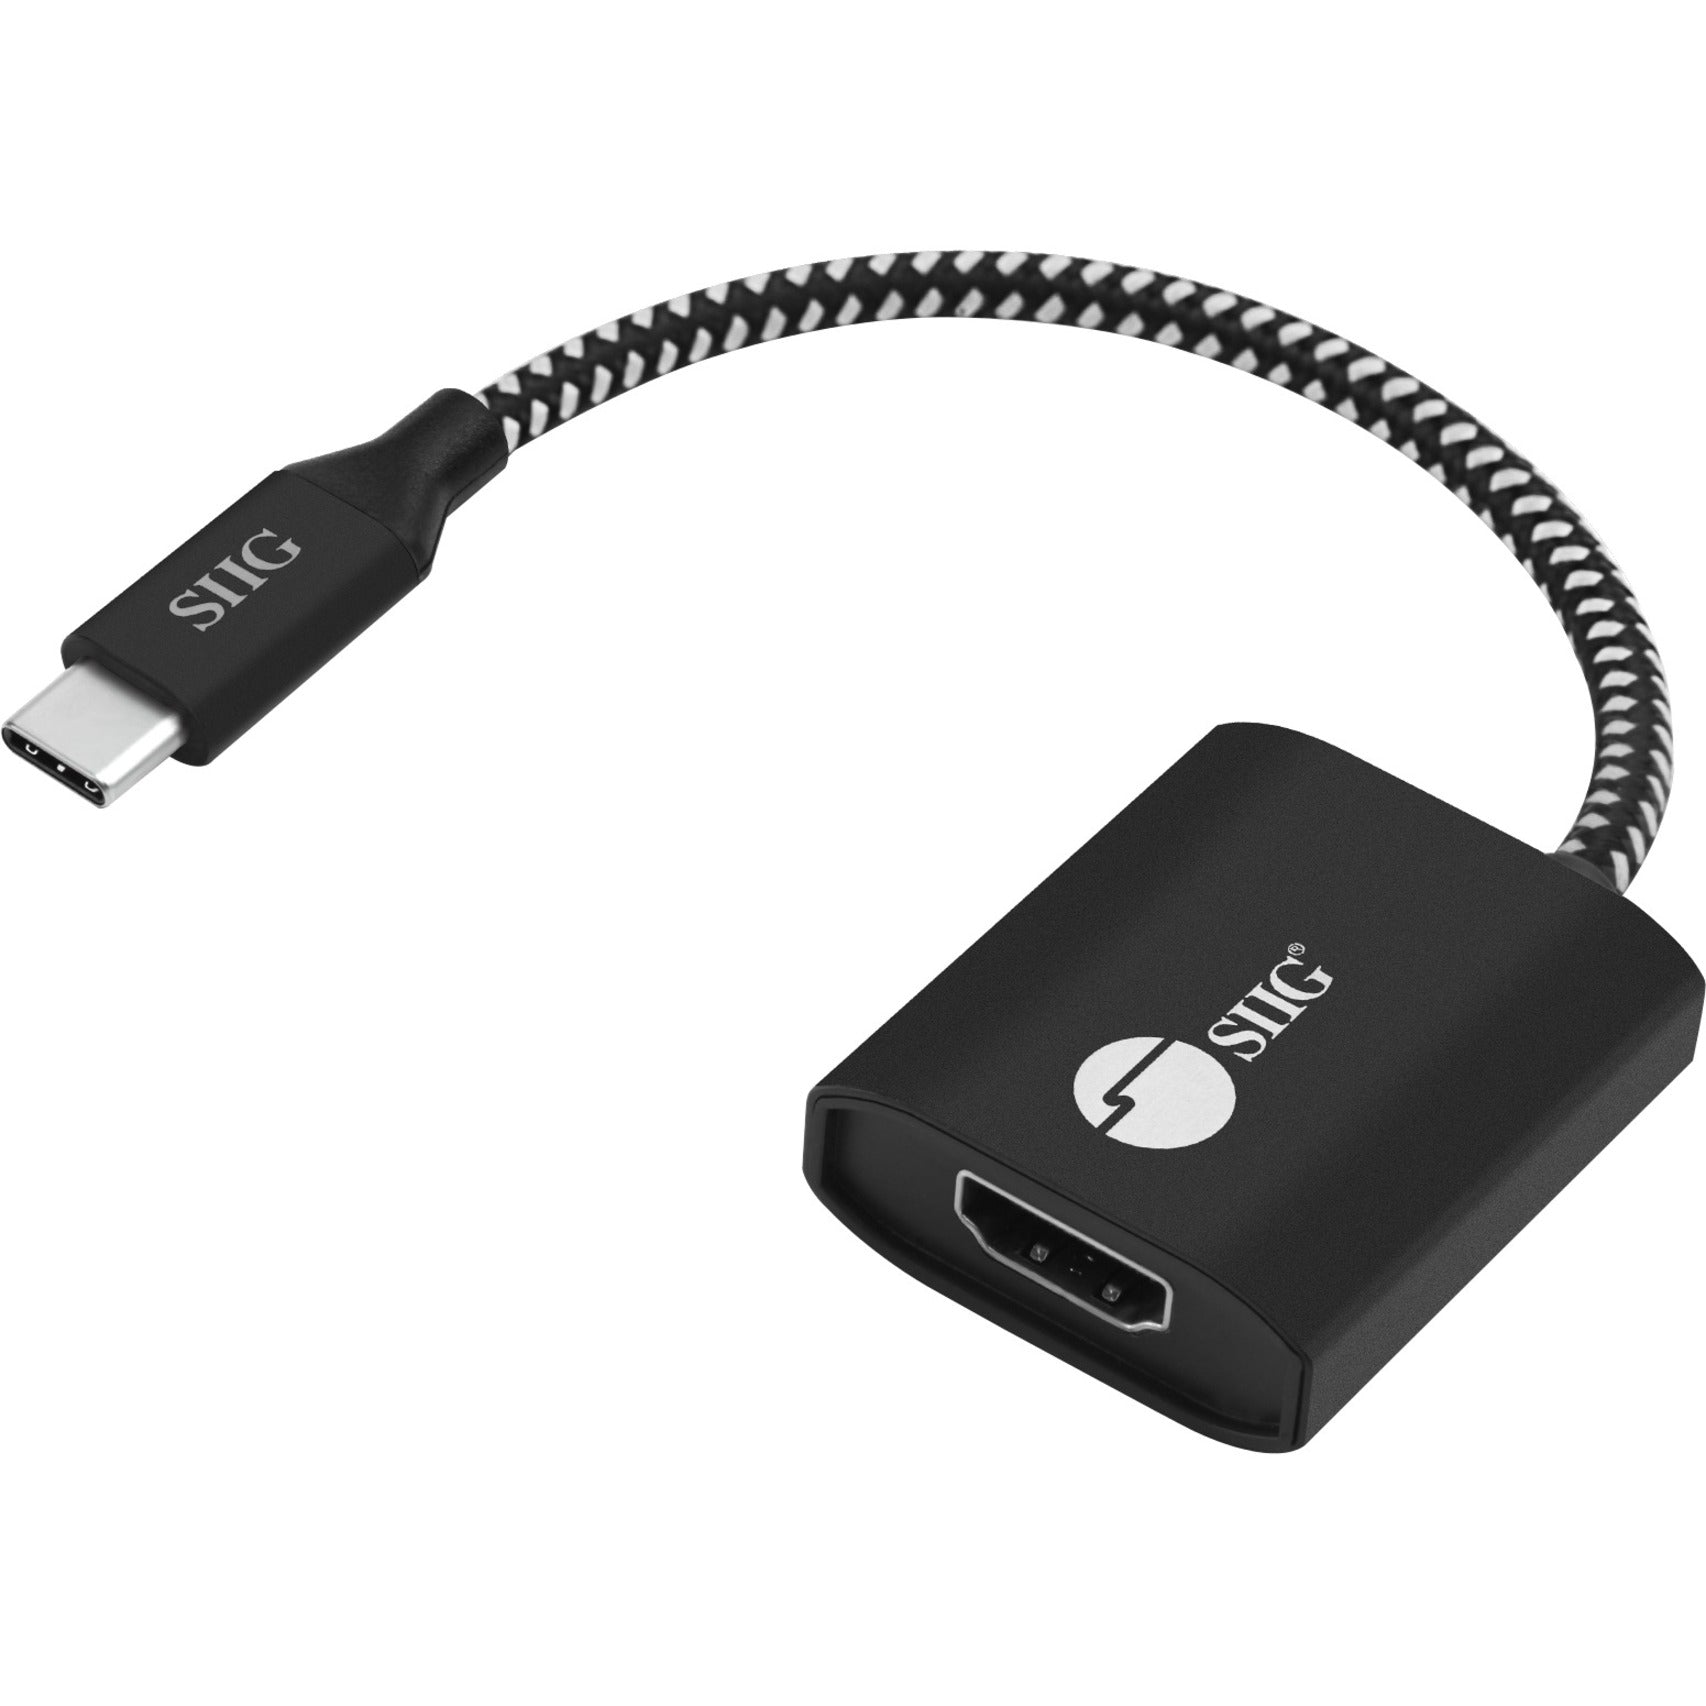 SIIG CB-TC0811-S1 USB Type-C to HDMI Video Cable Adapter with PD Charging, External Graphic Adapter